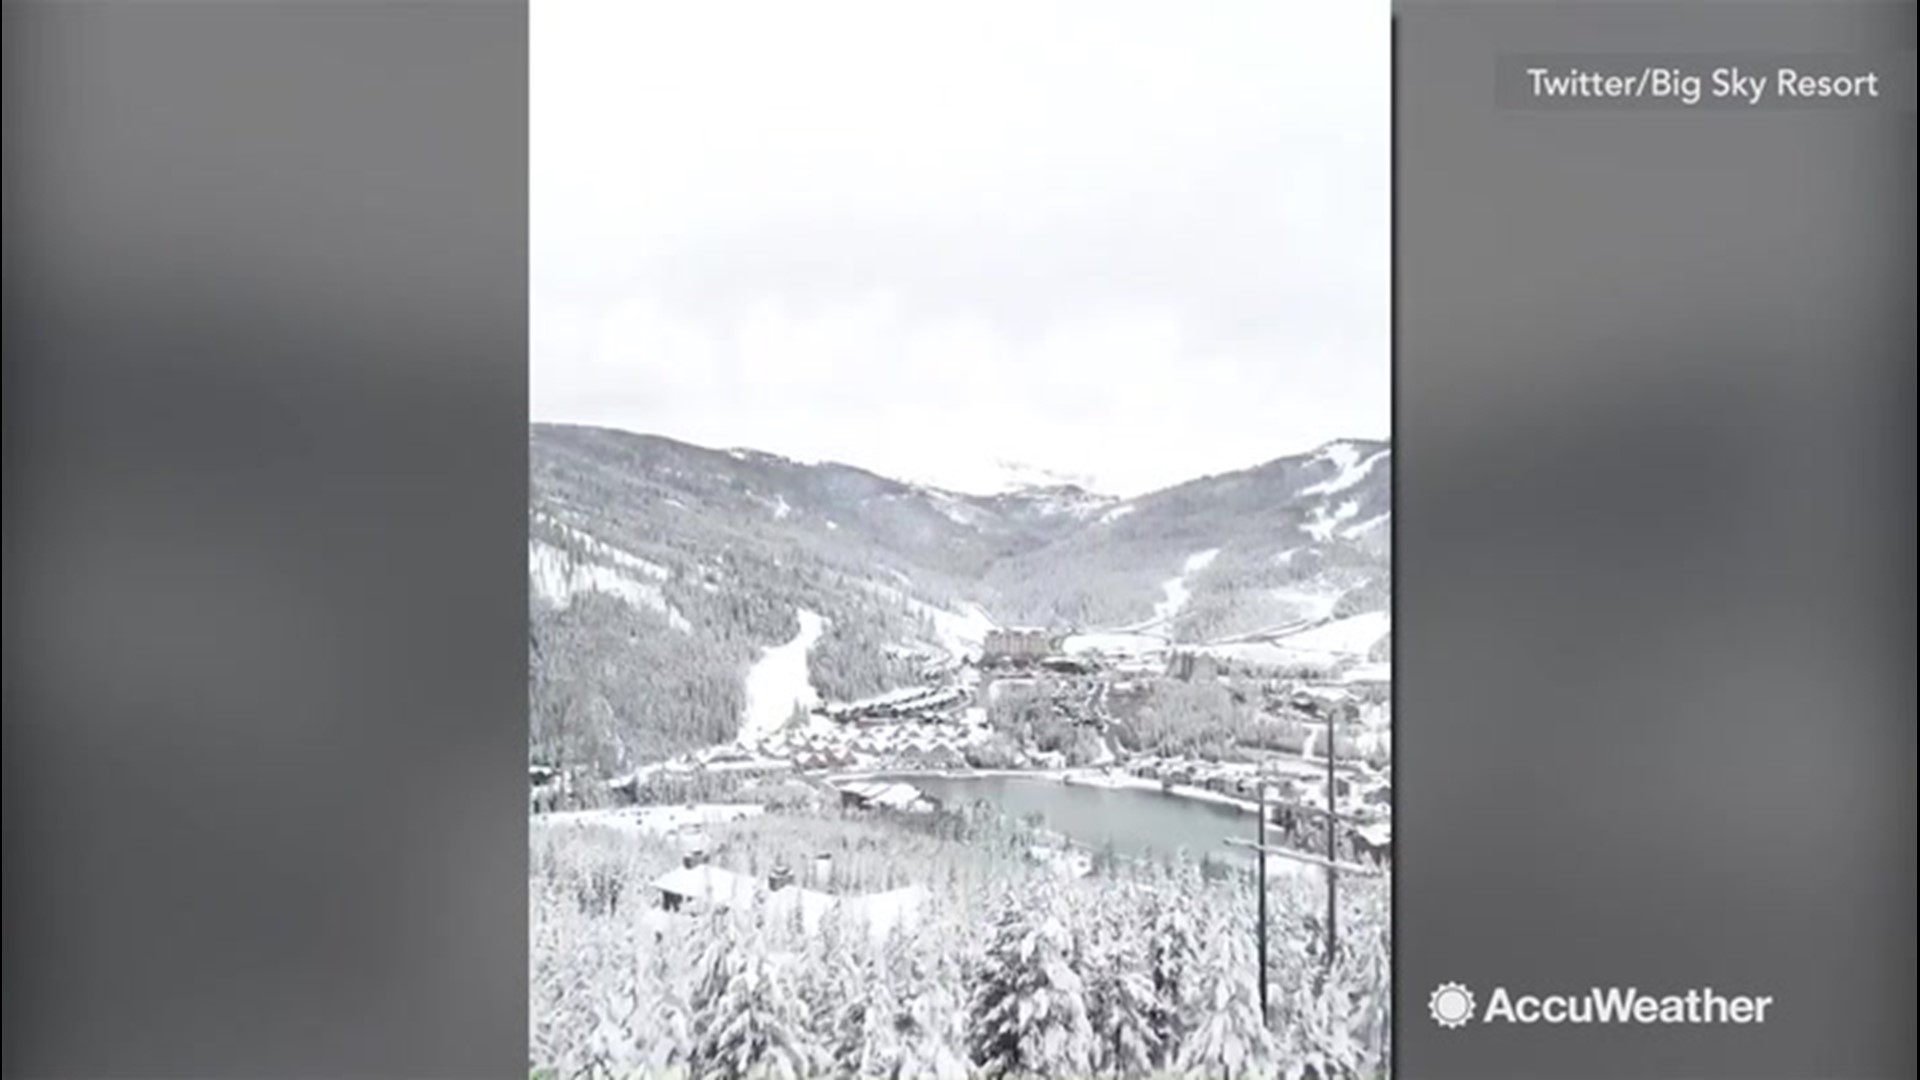 Big Sky Resort in Montana celebrated the summer solstice in the most unusual way.  The region was hit with snow.  The first day of summer is met with a winter wonderland on June 21.